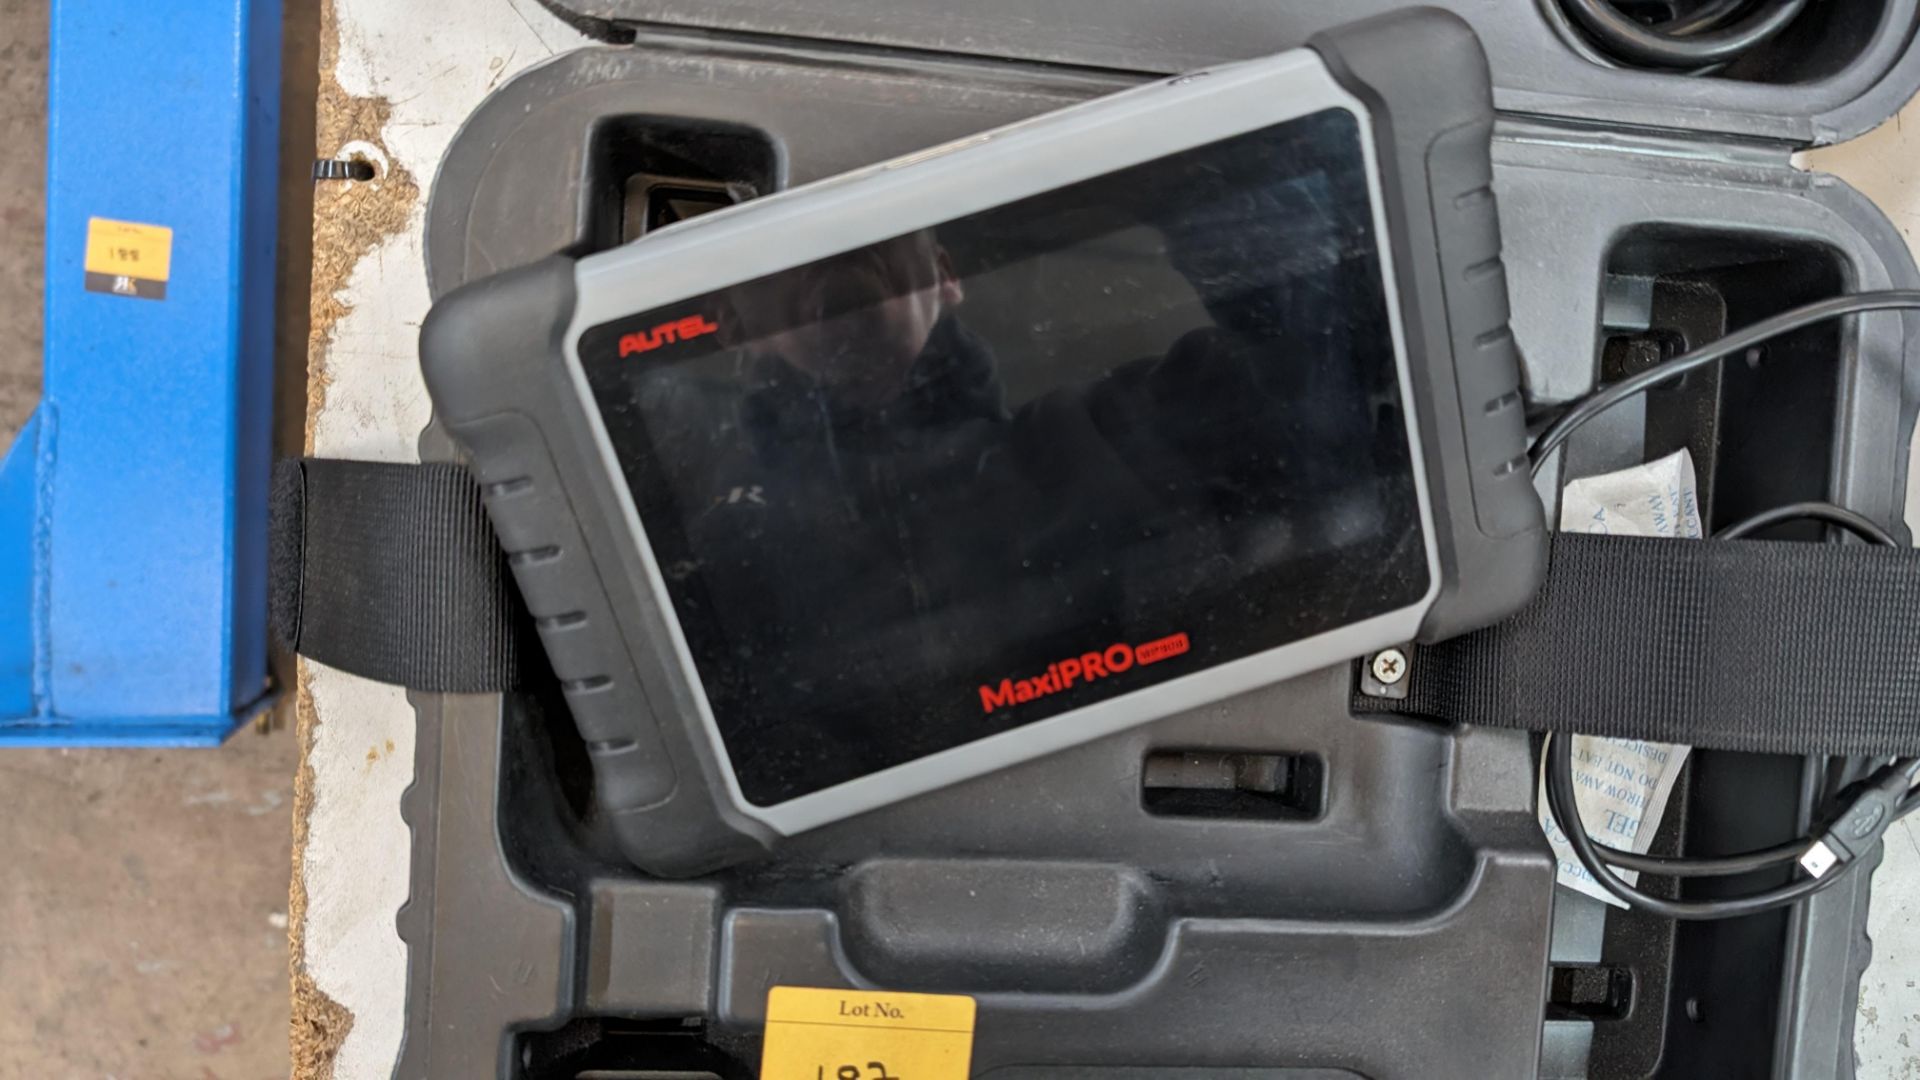 Autel MaxiPRO model MP808 touchscreen diagnostics device including case, cables & book pack - Image 4 of 11